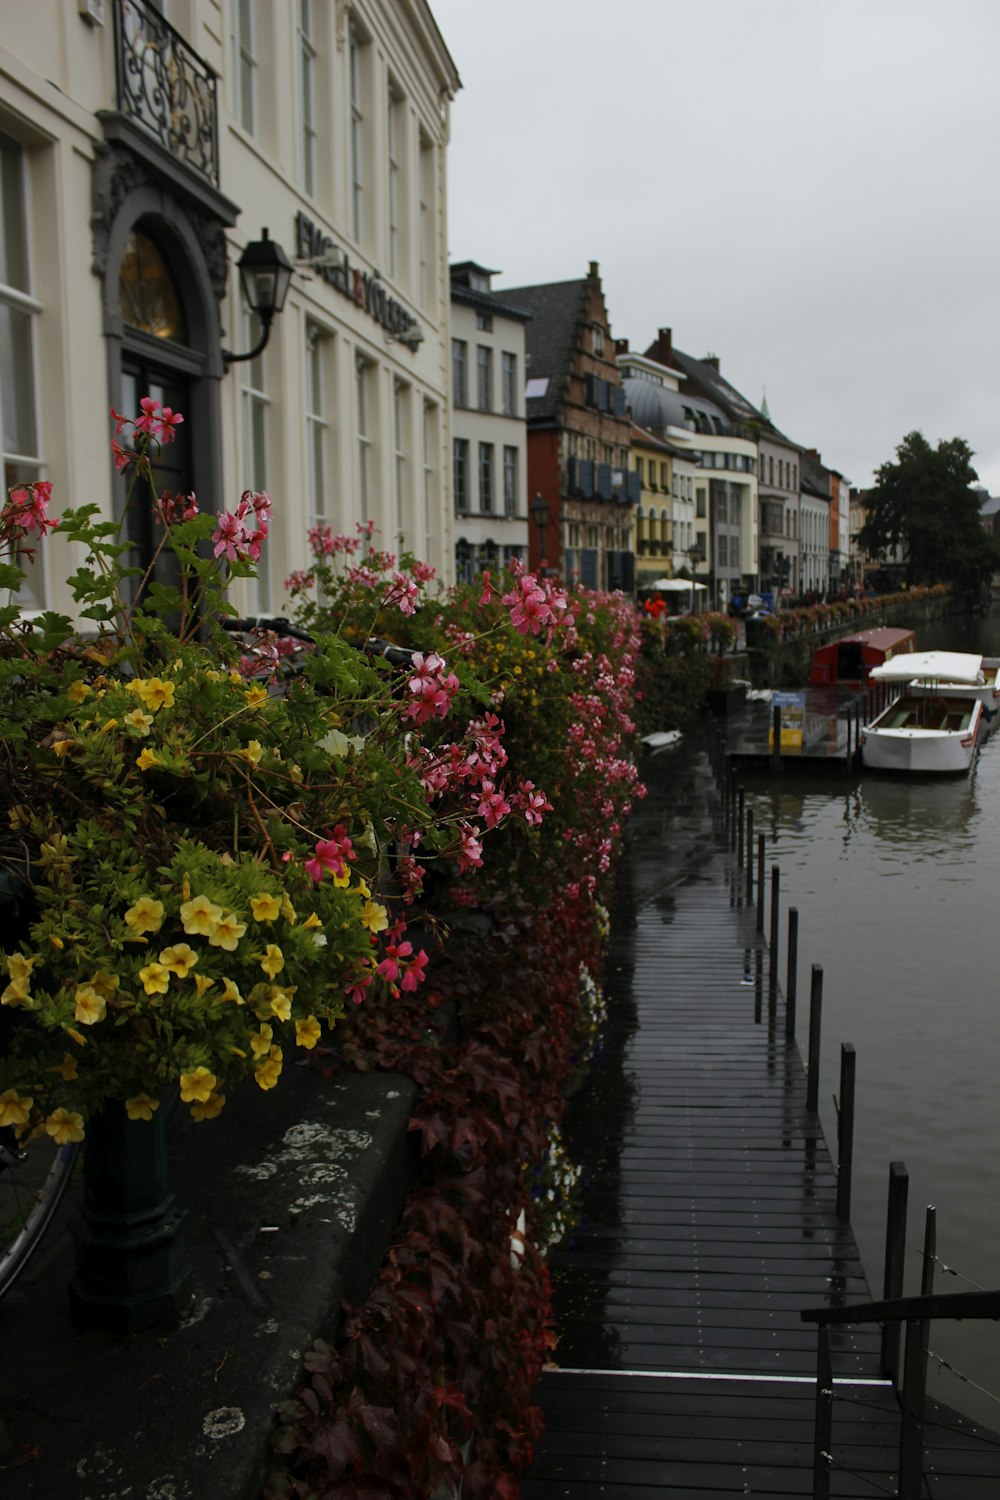 a row of buildings along a river with boats in the water